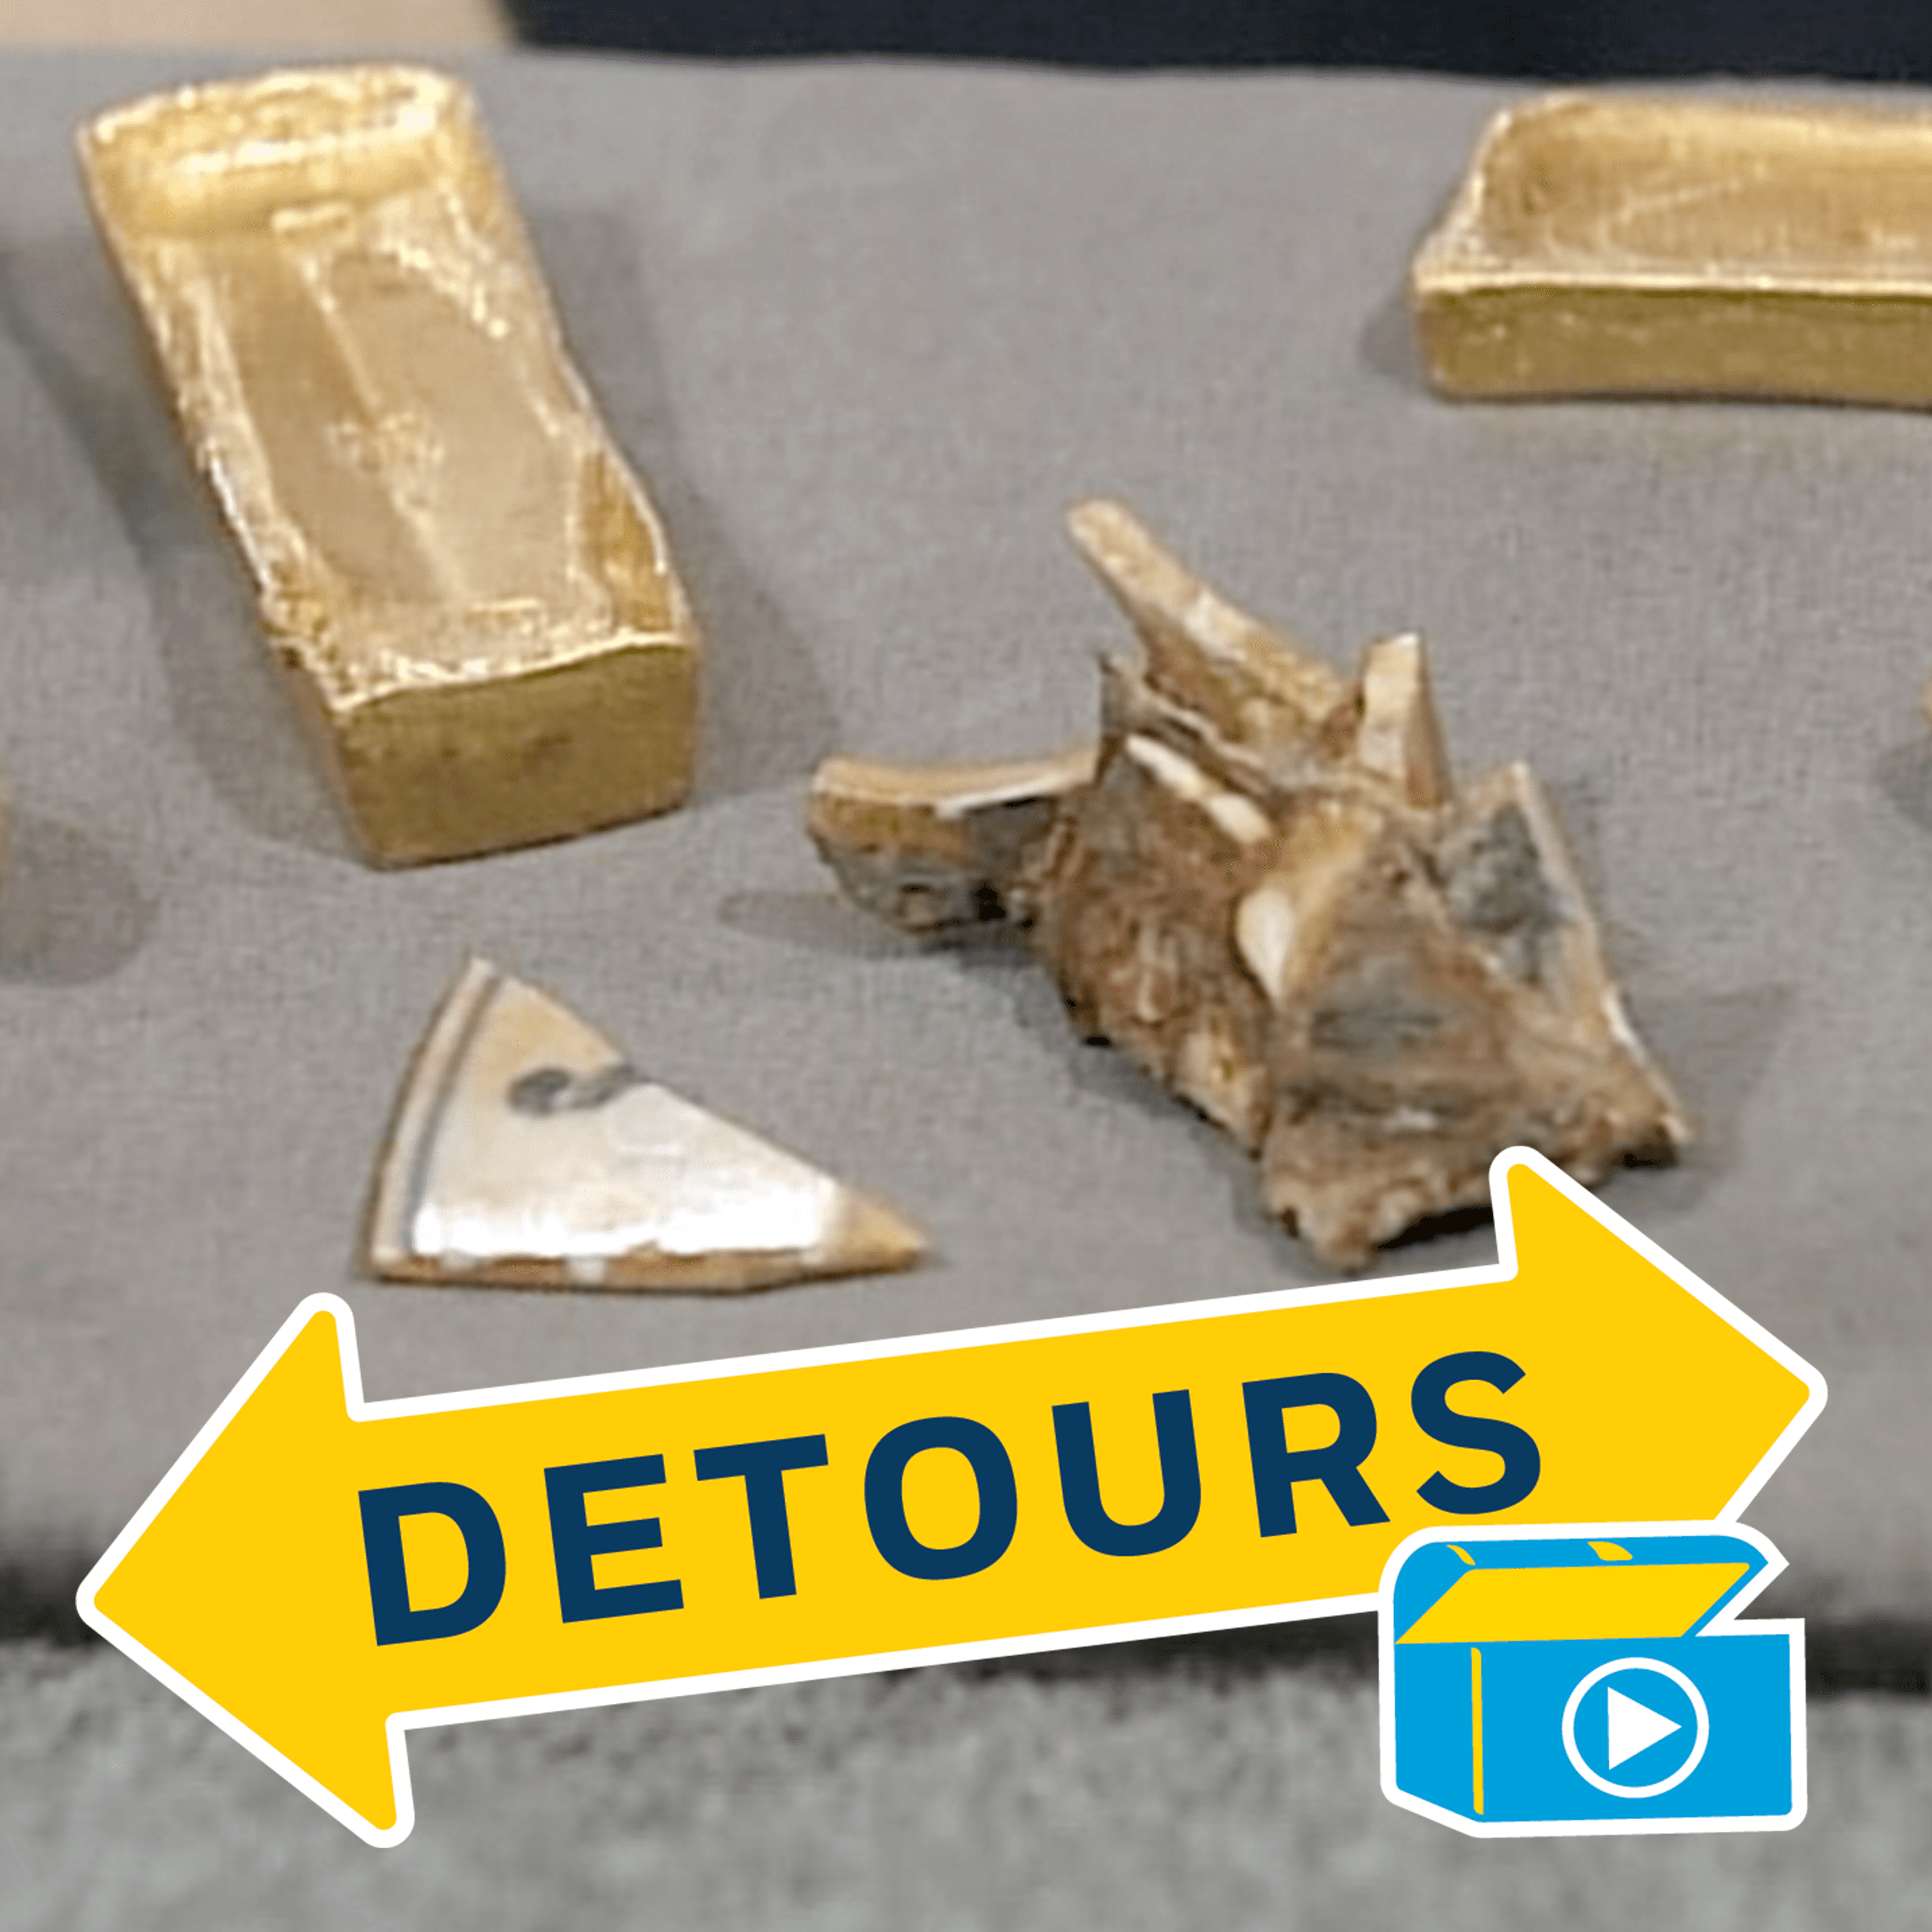 Thumbnail for "All that Glitters - Gold ingots, retrieved from the ocean floor and appraised on America’s favorite antiques show back in 1999 are now the subject of an international investigation.".